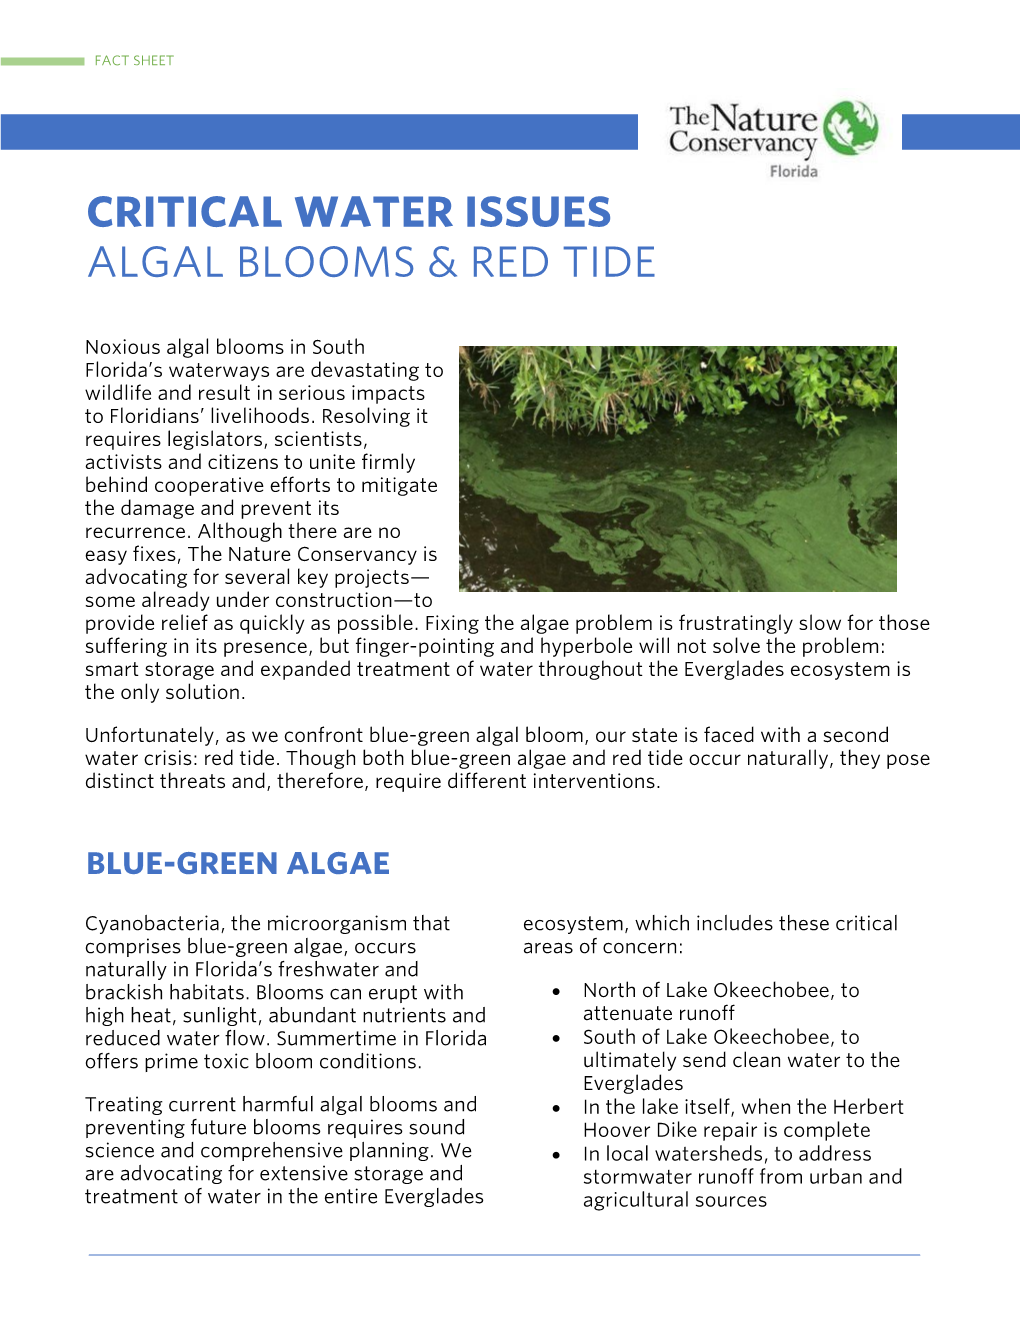 Critical Water Issues Algal Blooms & Red Tide